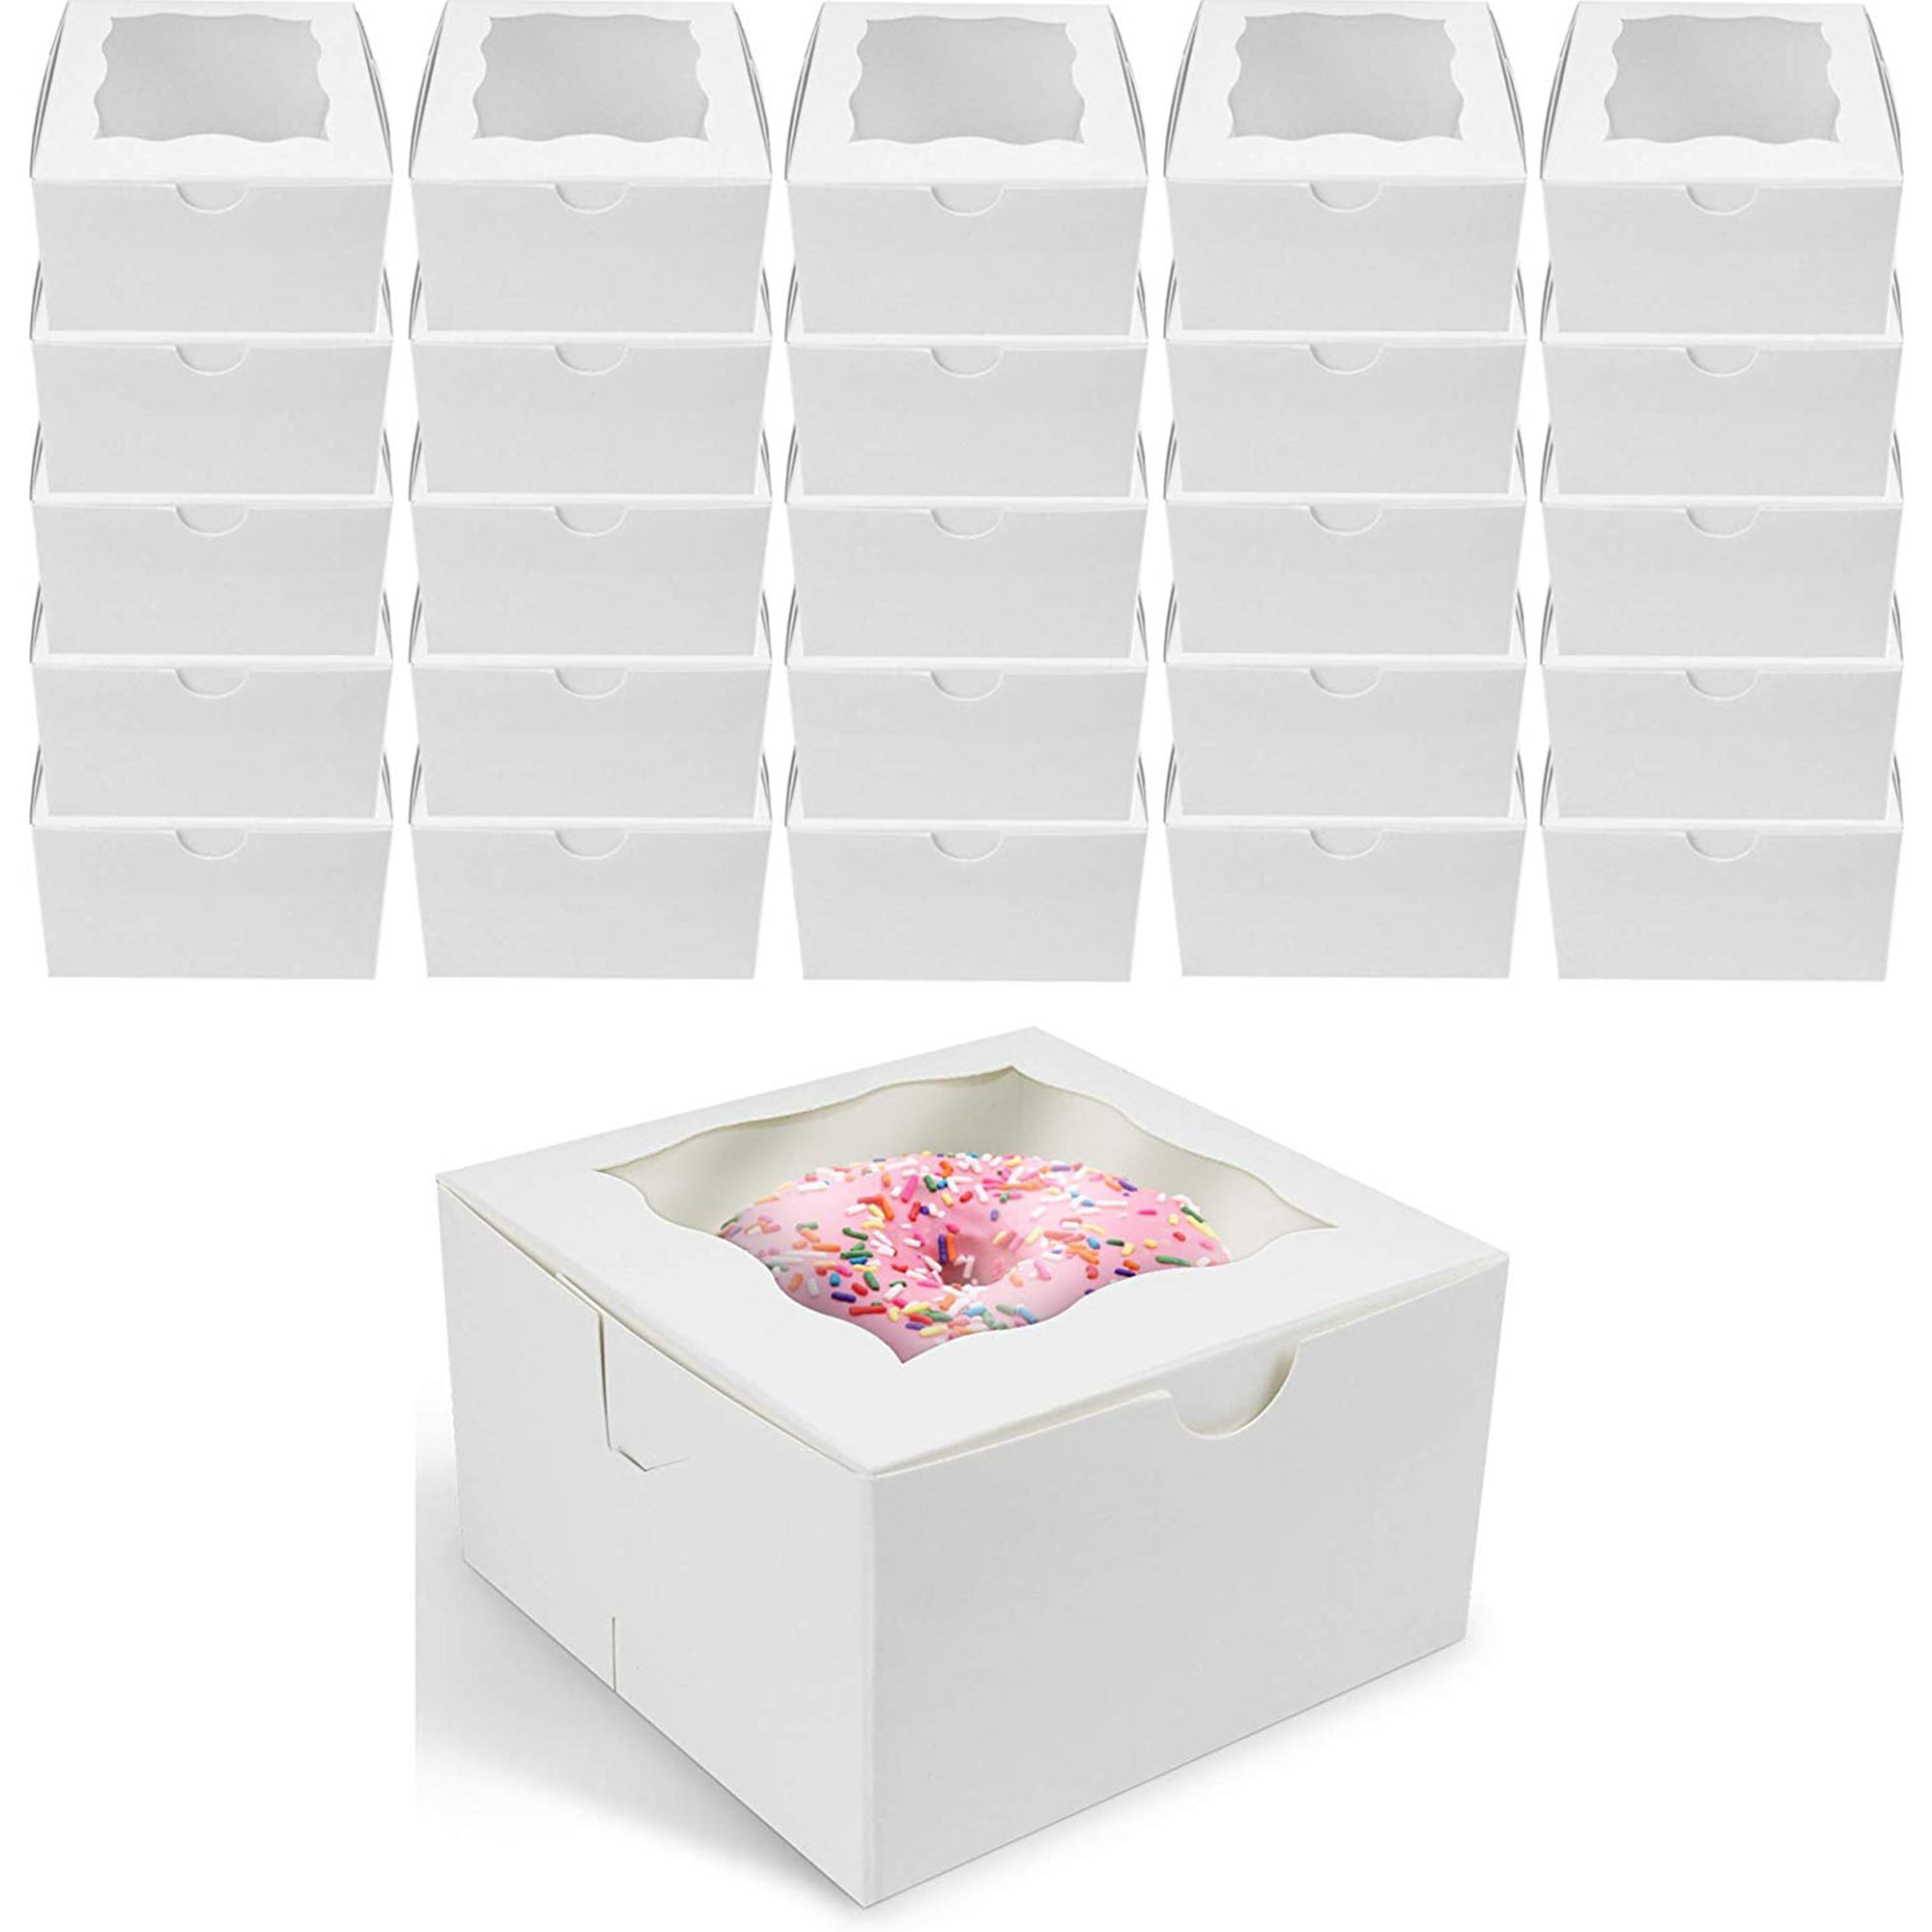 25 Small Bakery Box with Window 6x6x3 White for 